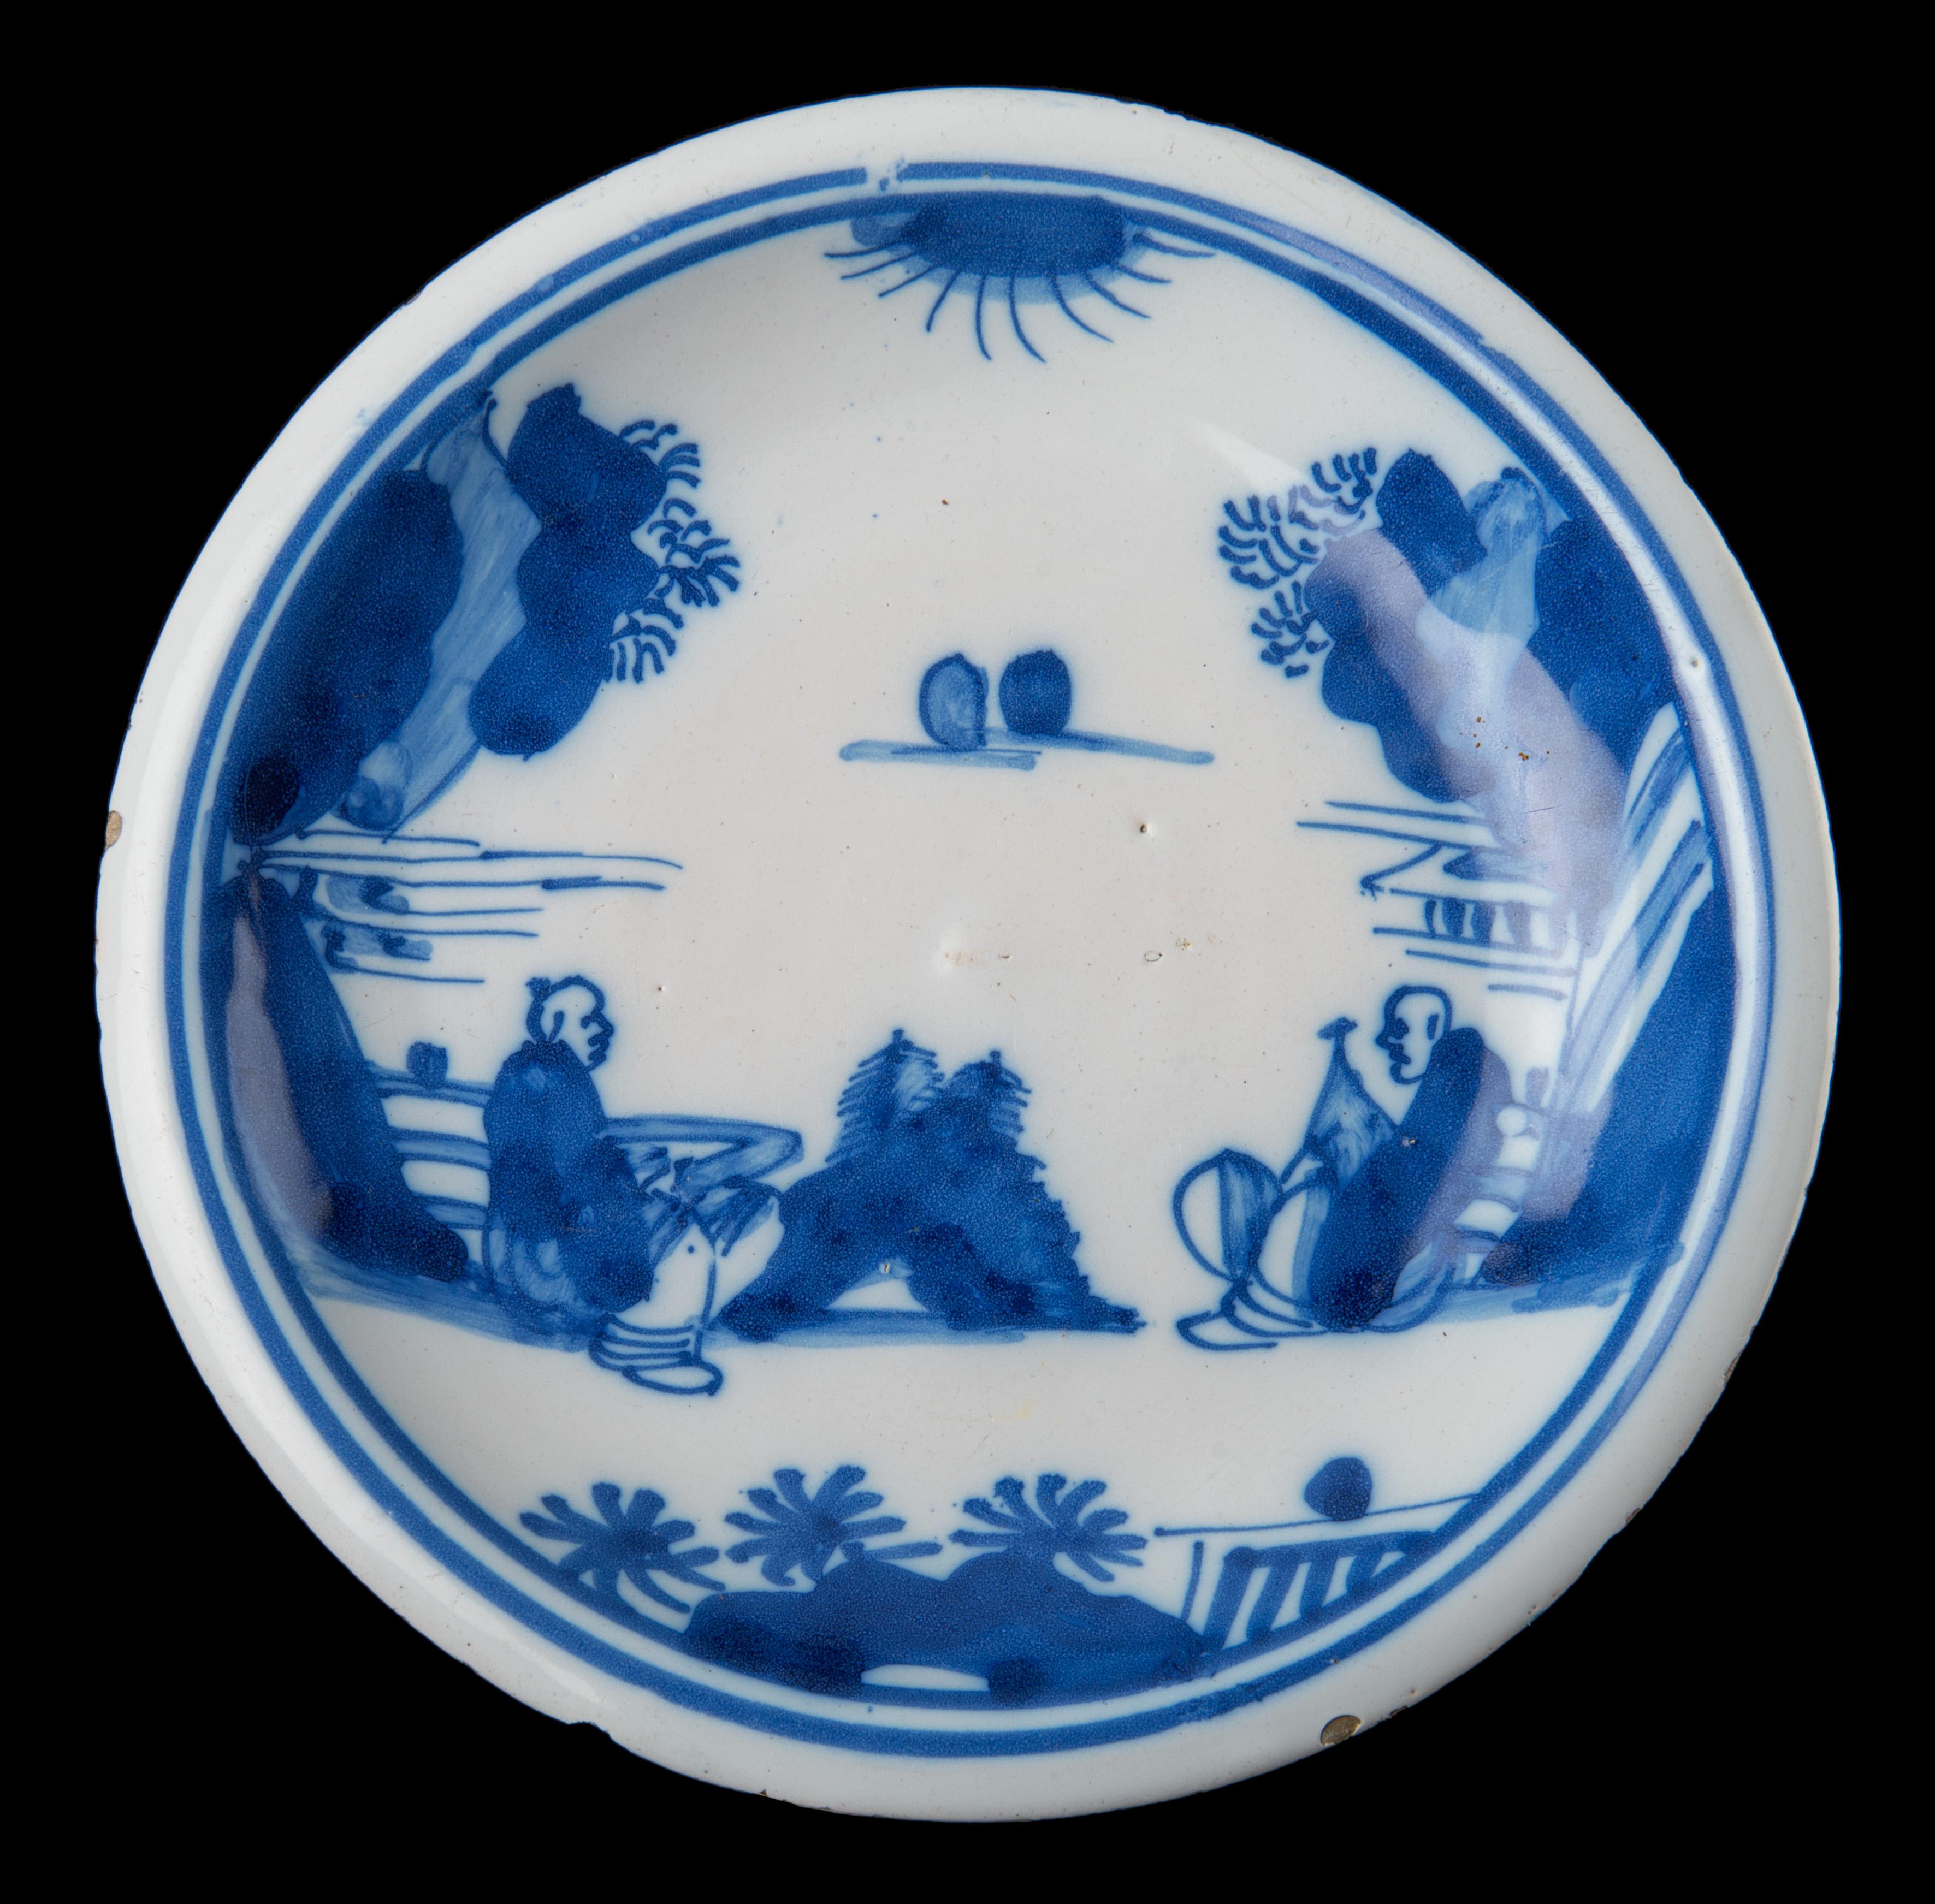 Blue and white plate with a chinoiserie landscape with two sitting Chinese figures, within a double circle. The back of the plate is painted with the number 5, and the foot rim is pierced. The decoration is inspired by Chinese porcelain from the